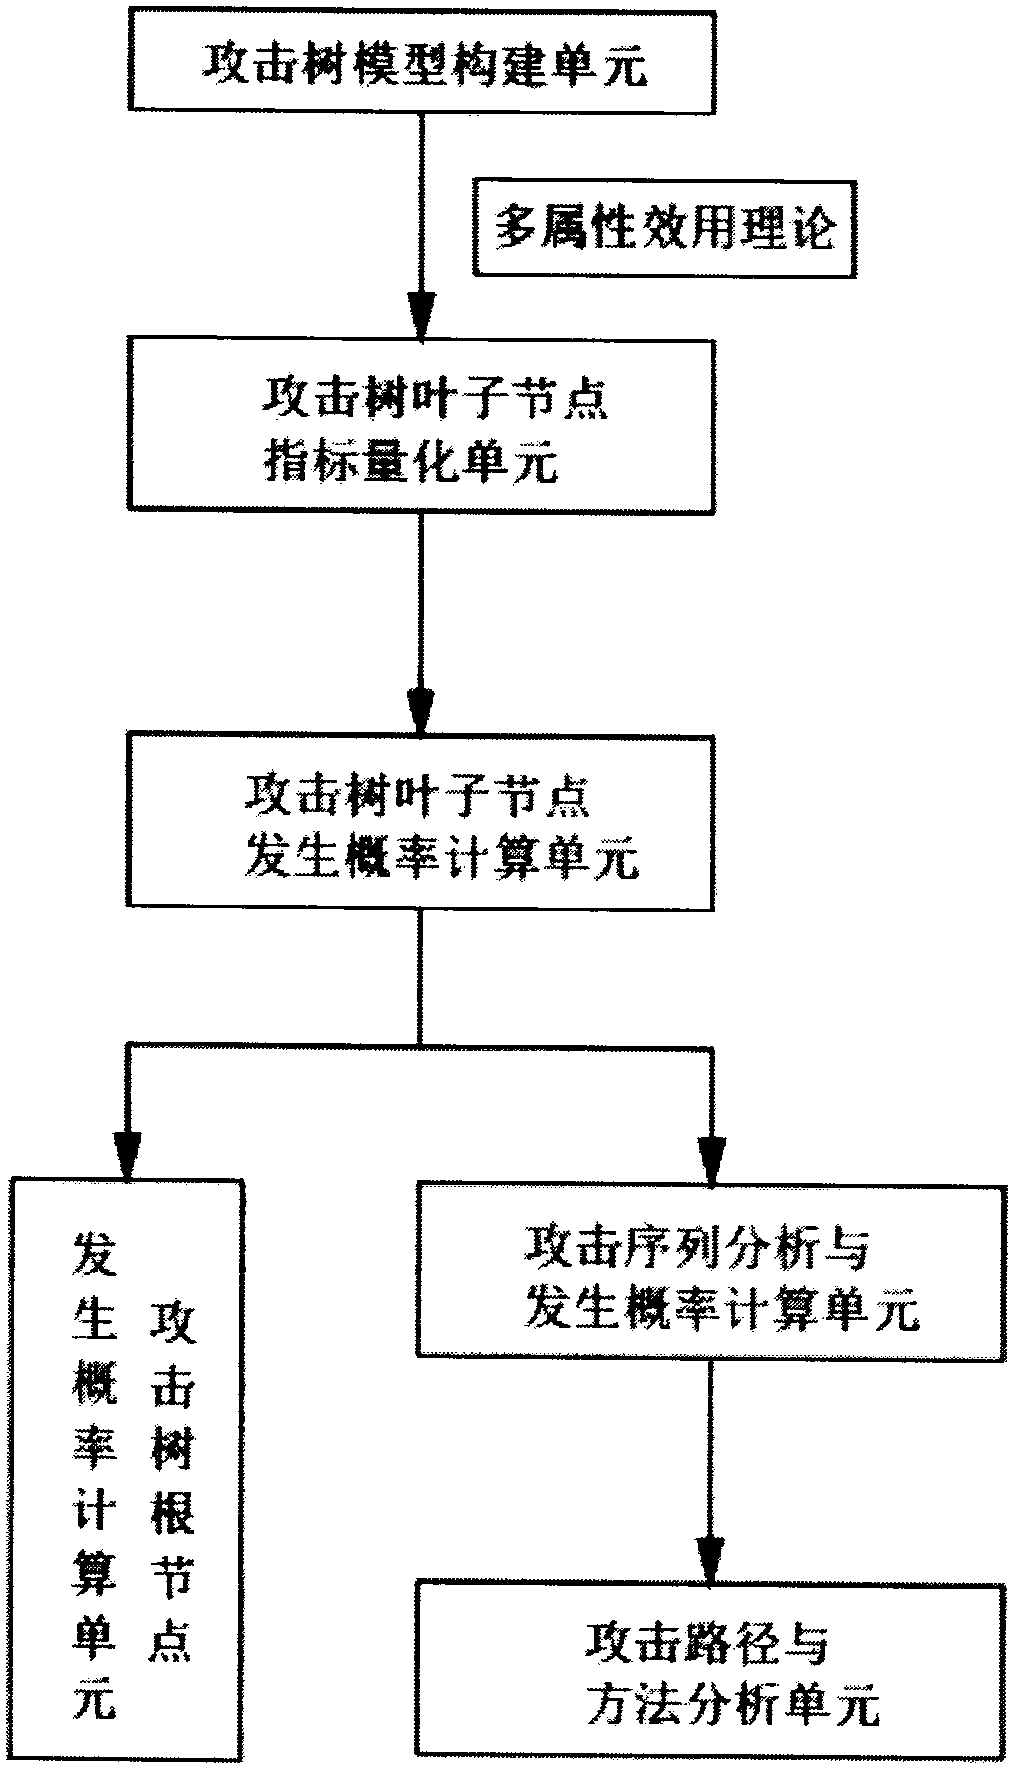 Attack tree-based intelligent network connection vehicle information security event occurrence probability evaluation method and system